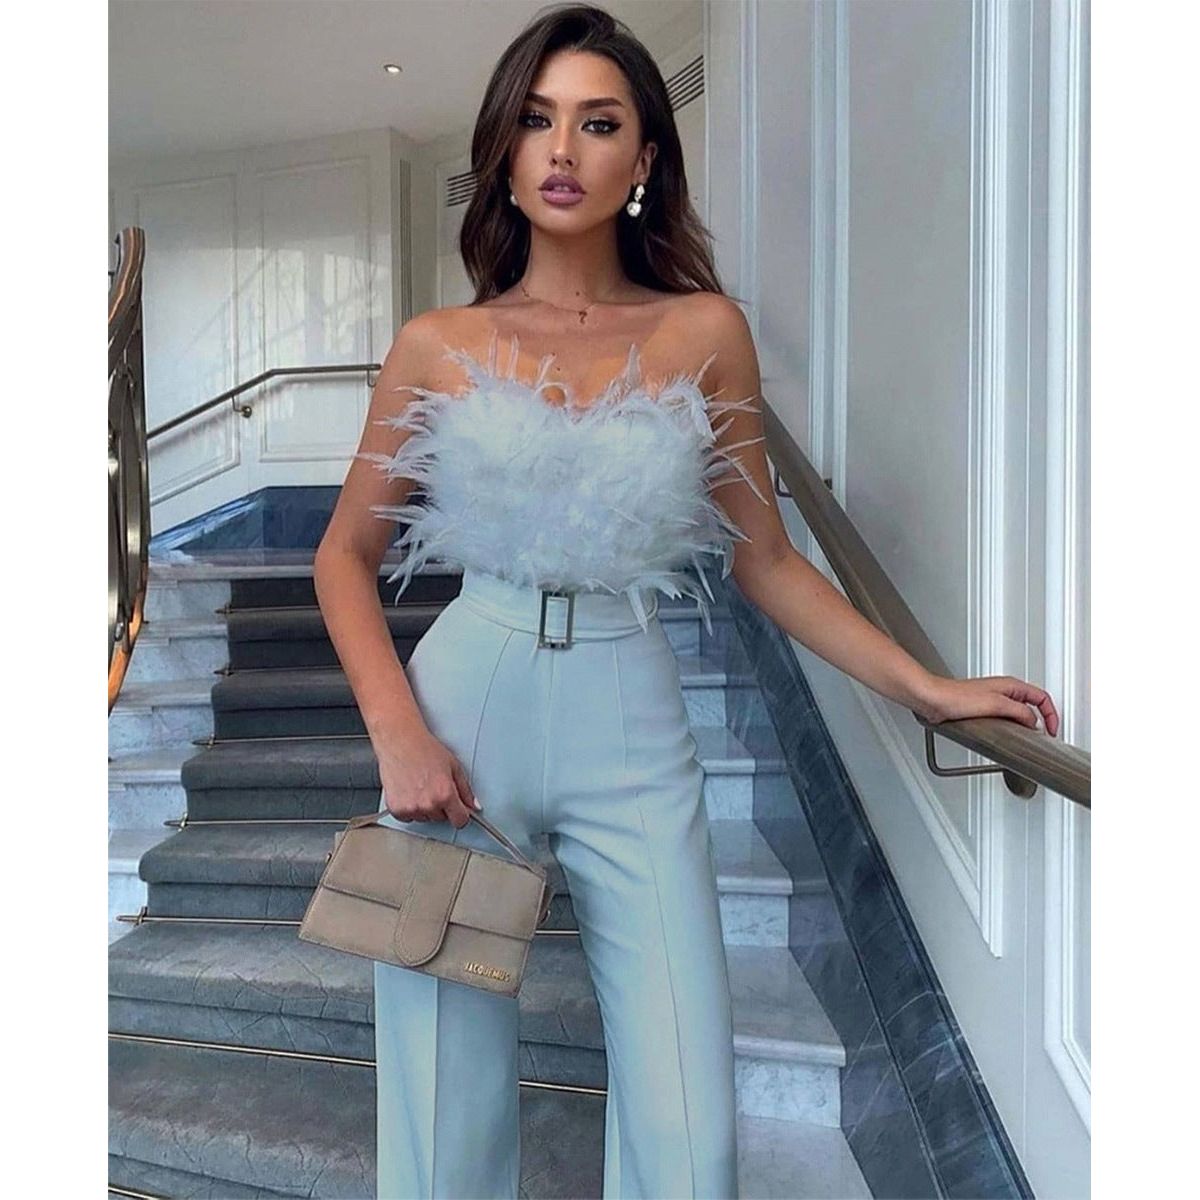 Buy Online Premimum Quality, Trendy and Highly Comfortable Feather Tube Top Fashion Jumpsuit - FEYONAS